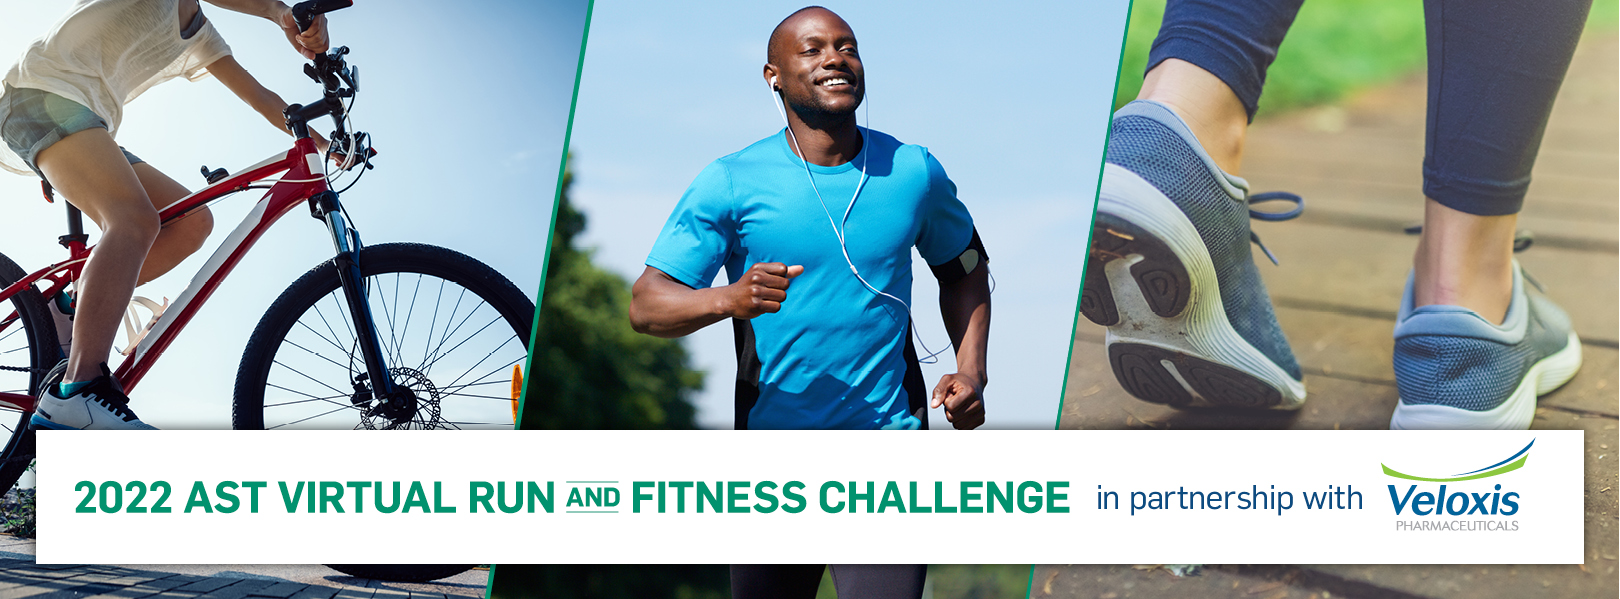 2022 AST Virtual Run and Fitness Challenge